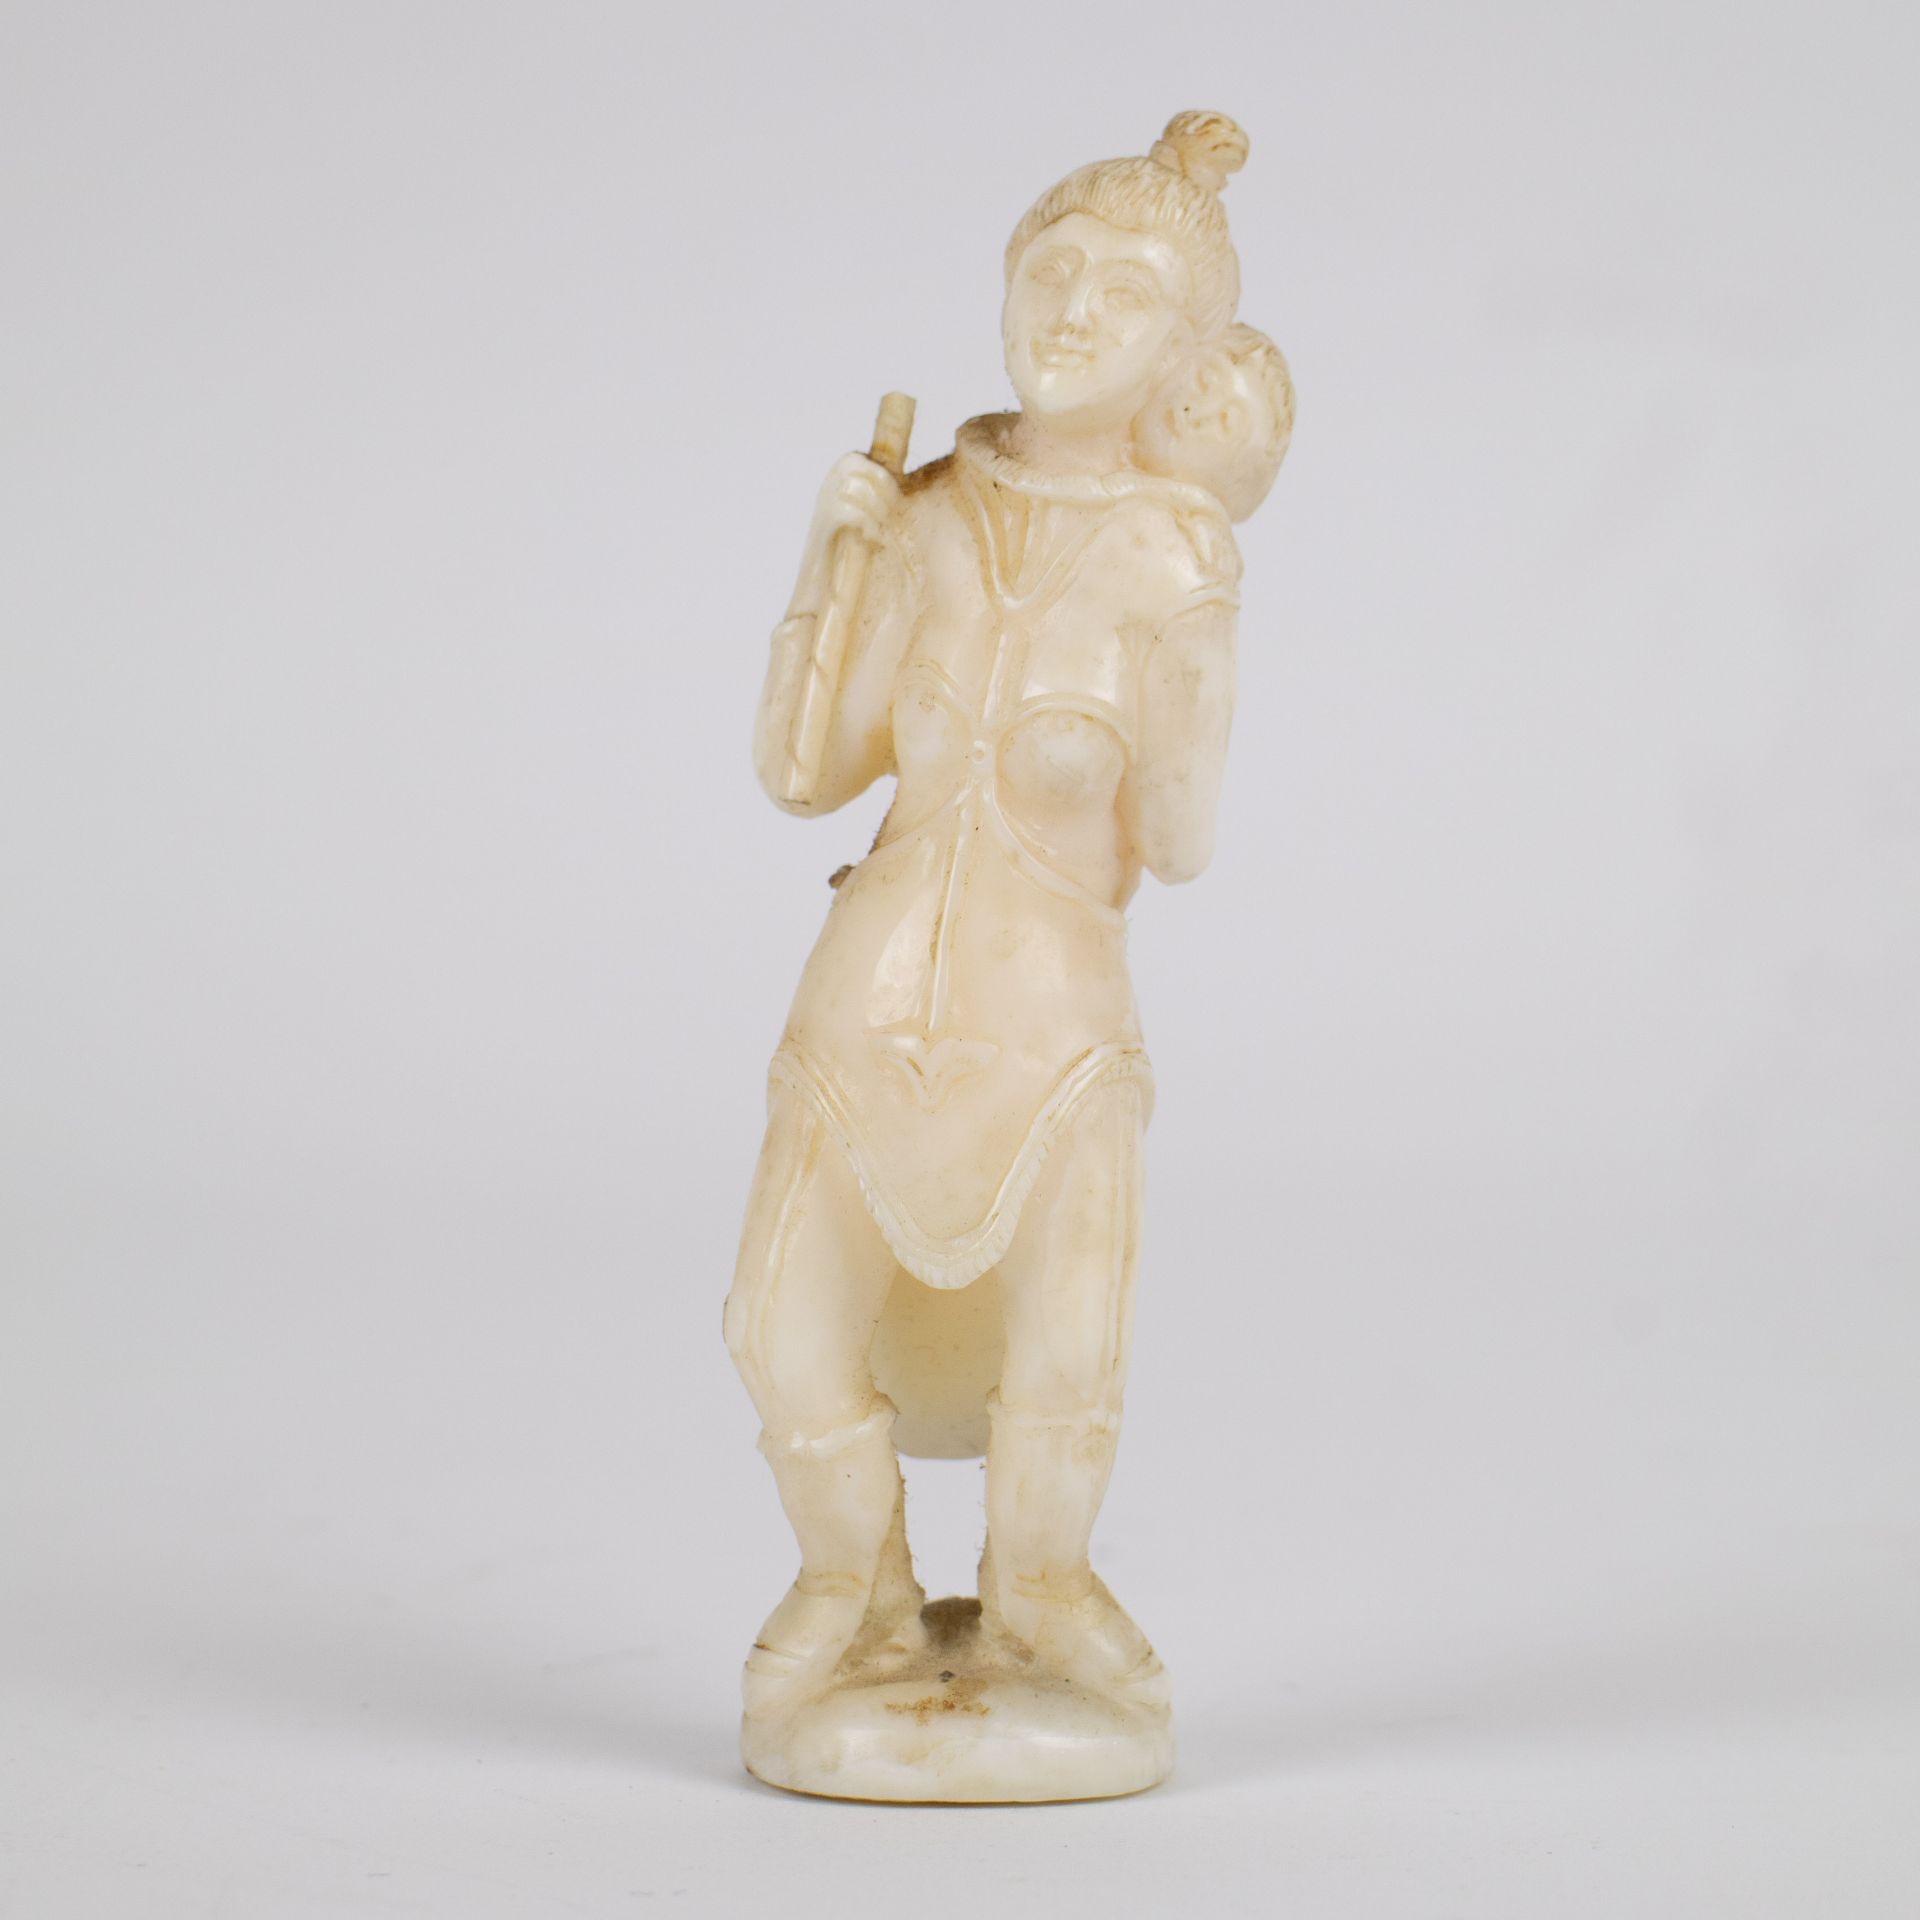 Marine ivory sculpture of a woman carrying a child on her back, Greenland, early 20th century.